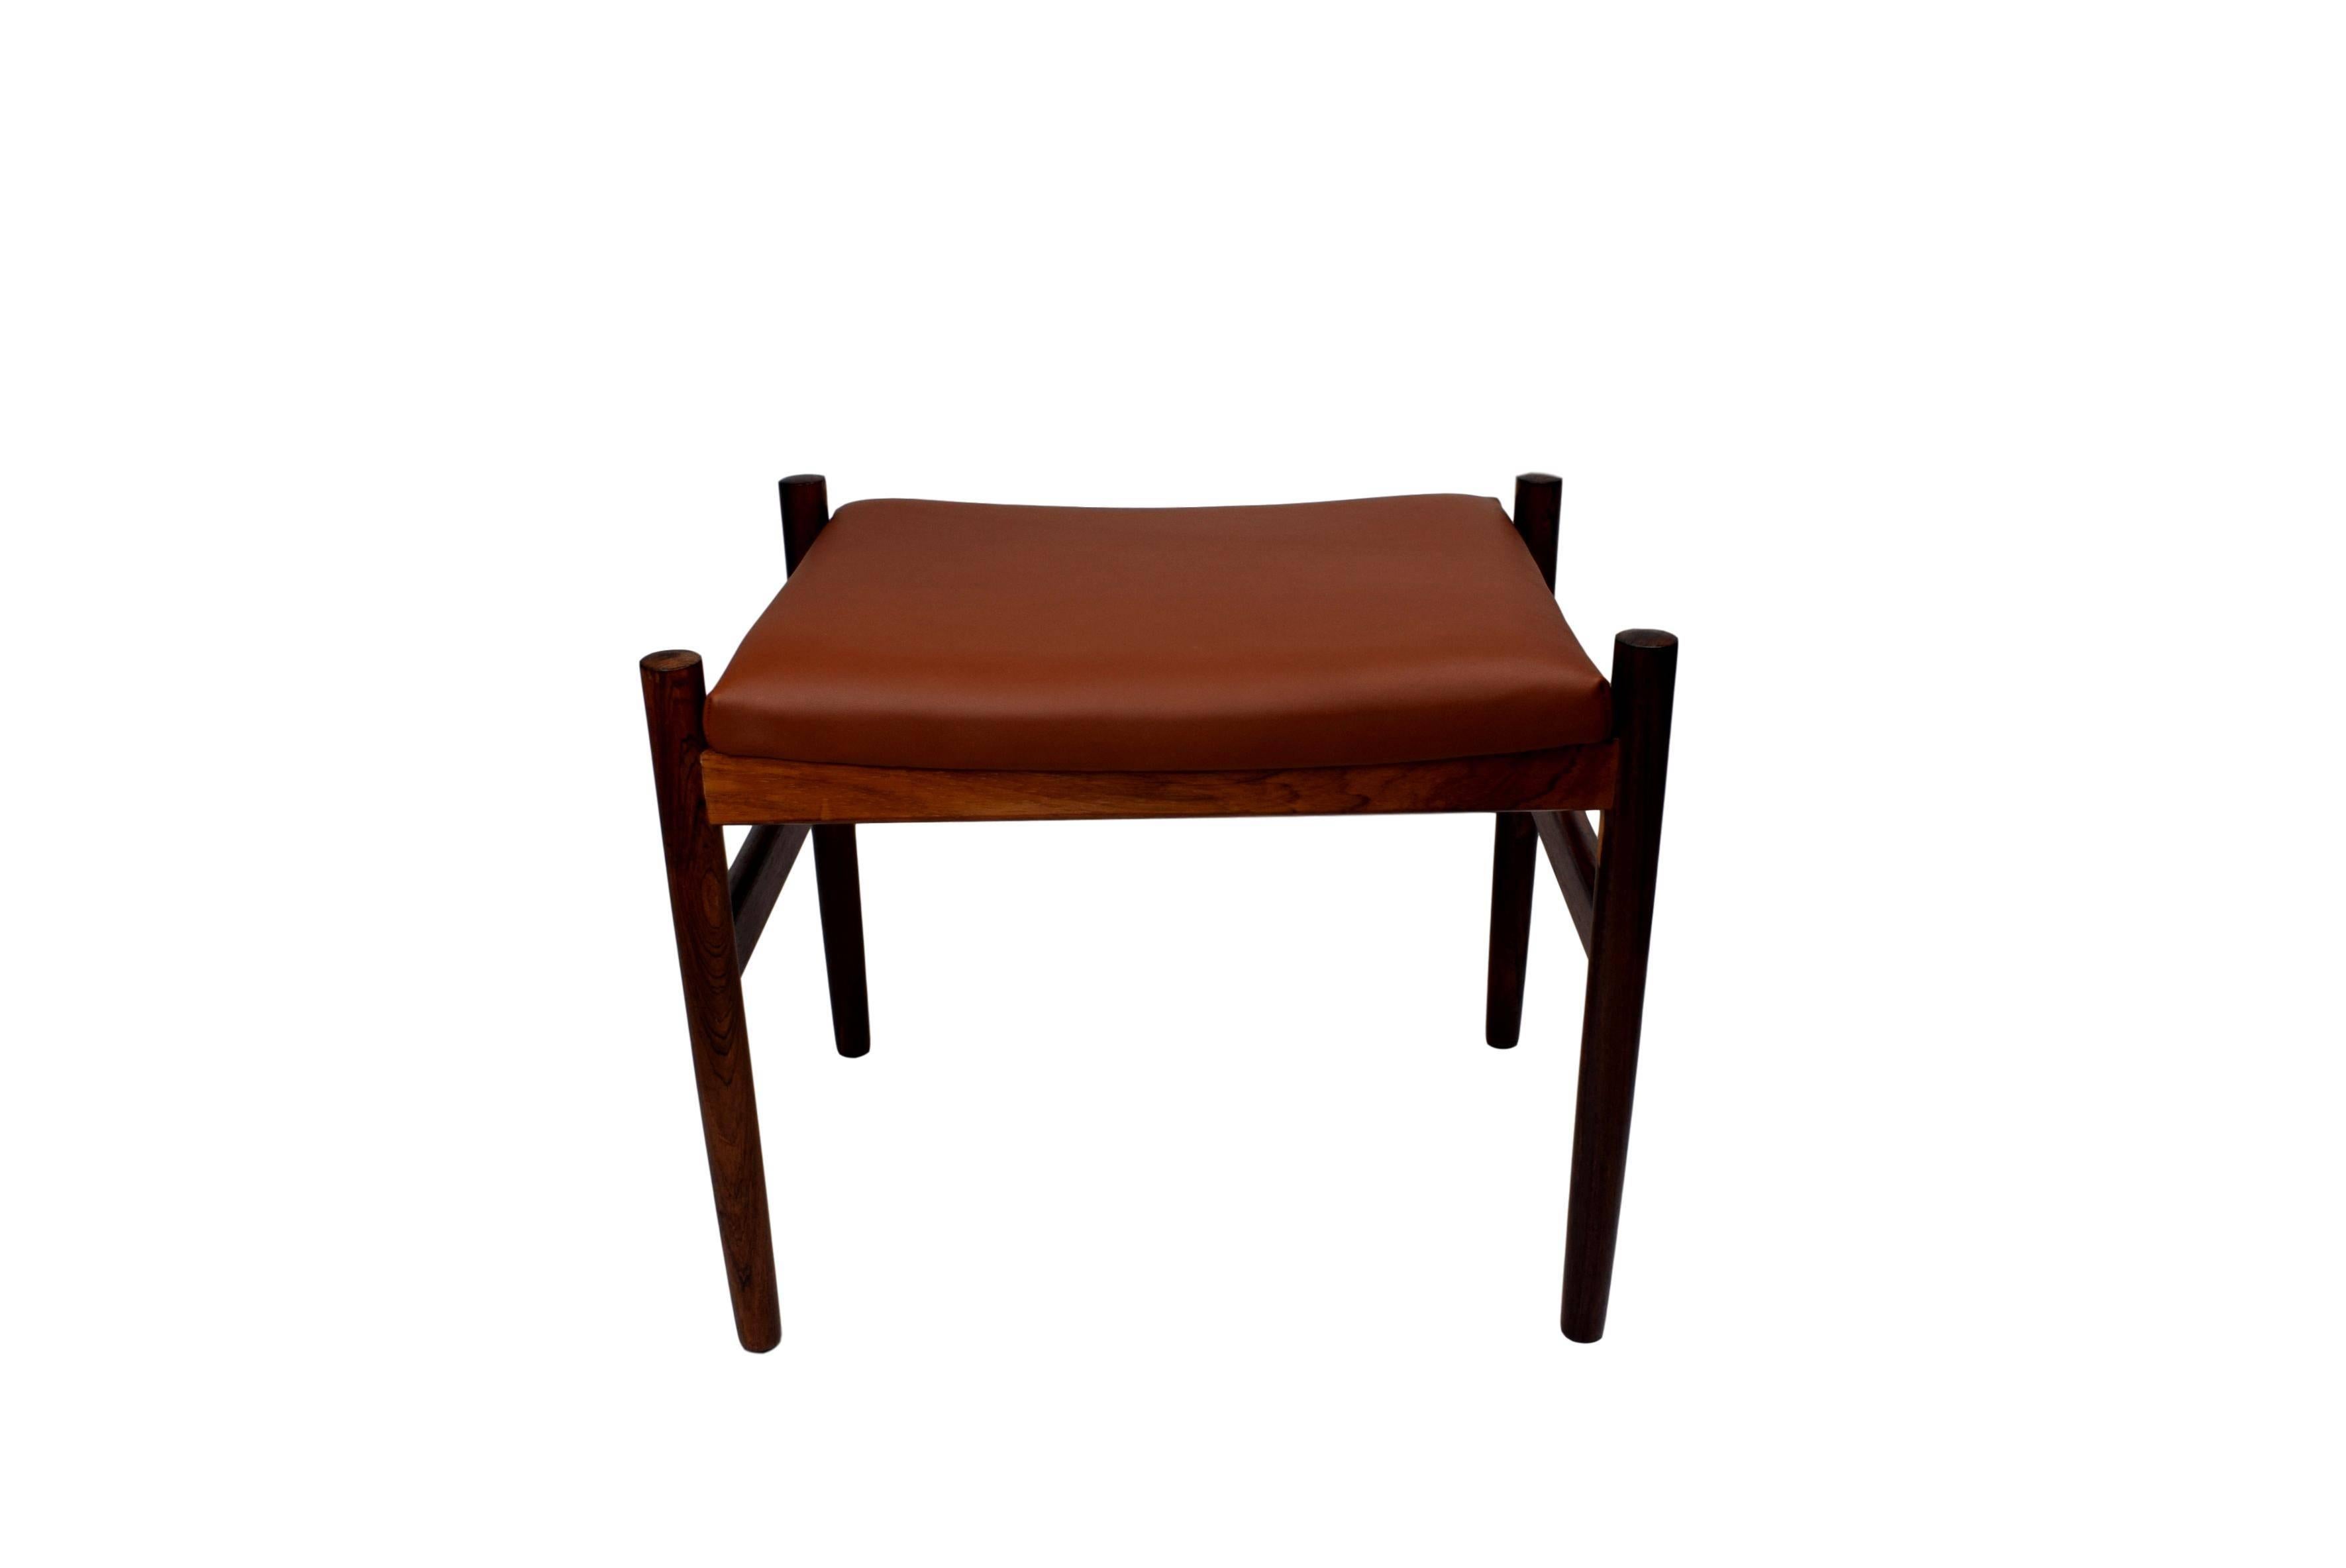 Danish Midcentury Rosewood Ottoman by Spøttrup, Brown Aniline Leather, Stamped In Good Condition For Sale In Denmark, DK